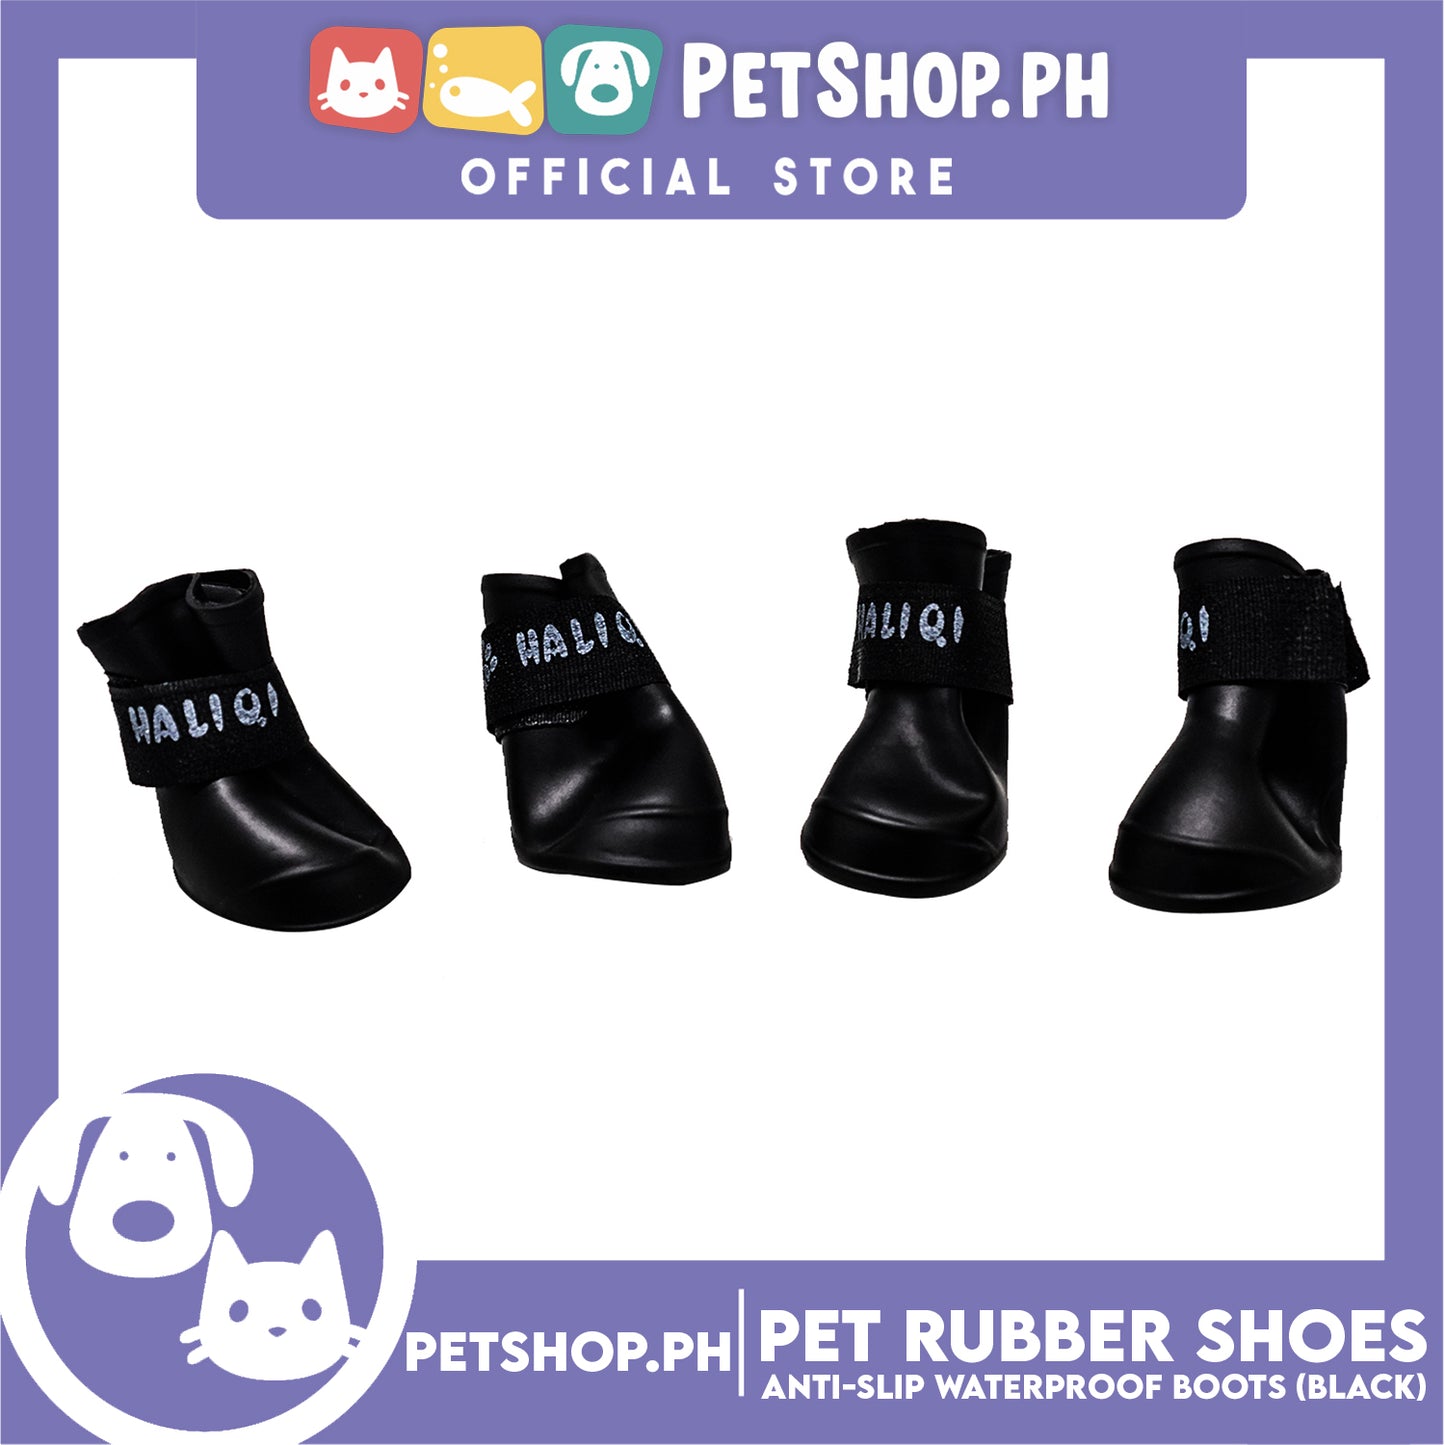 Pet Rubber Rain Shoes Anti-Slip Waterproof Rubber Boots with Paws Cover P6711 - Rubber Boots (Black)